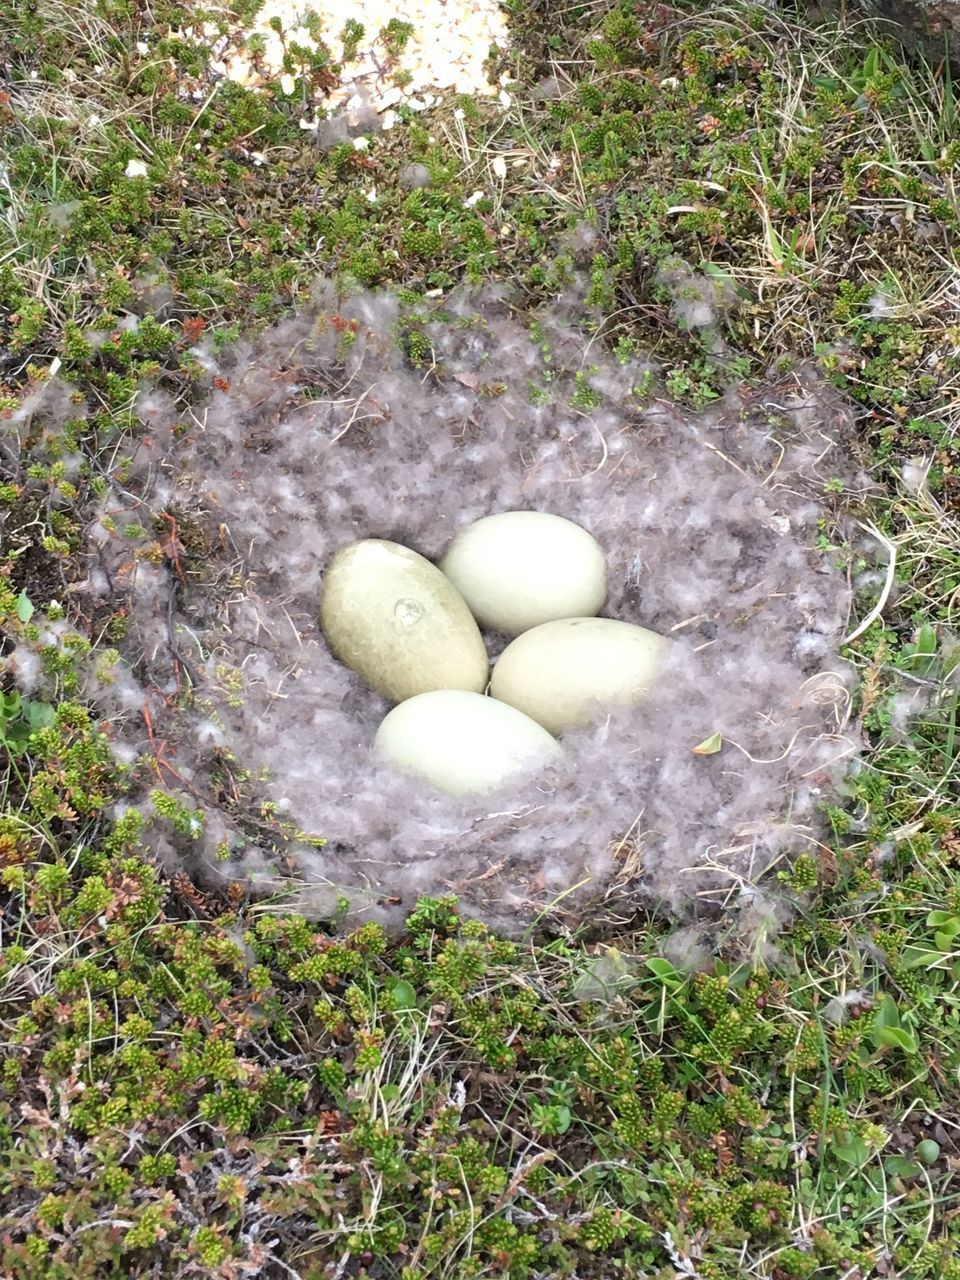 HIGH ANGLE VIEW OF EGGS ON FIELD IN SUNLIGHT